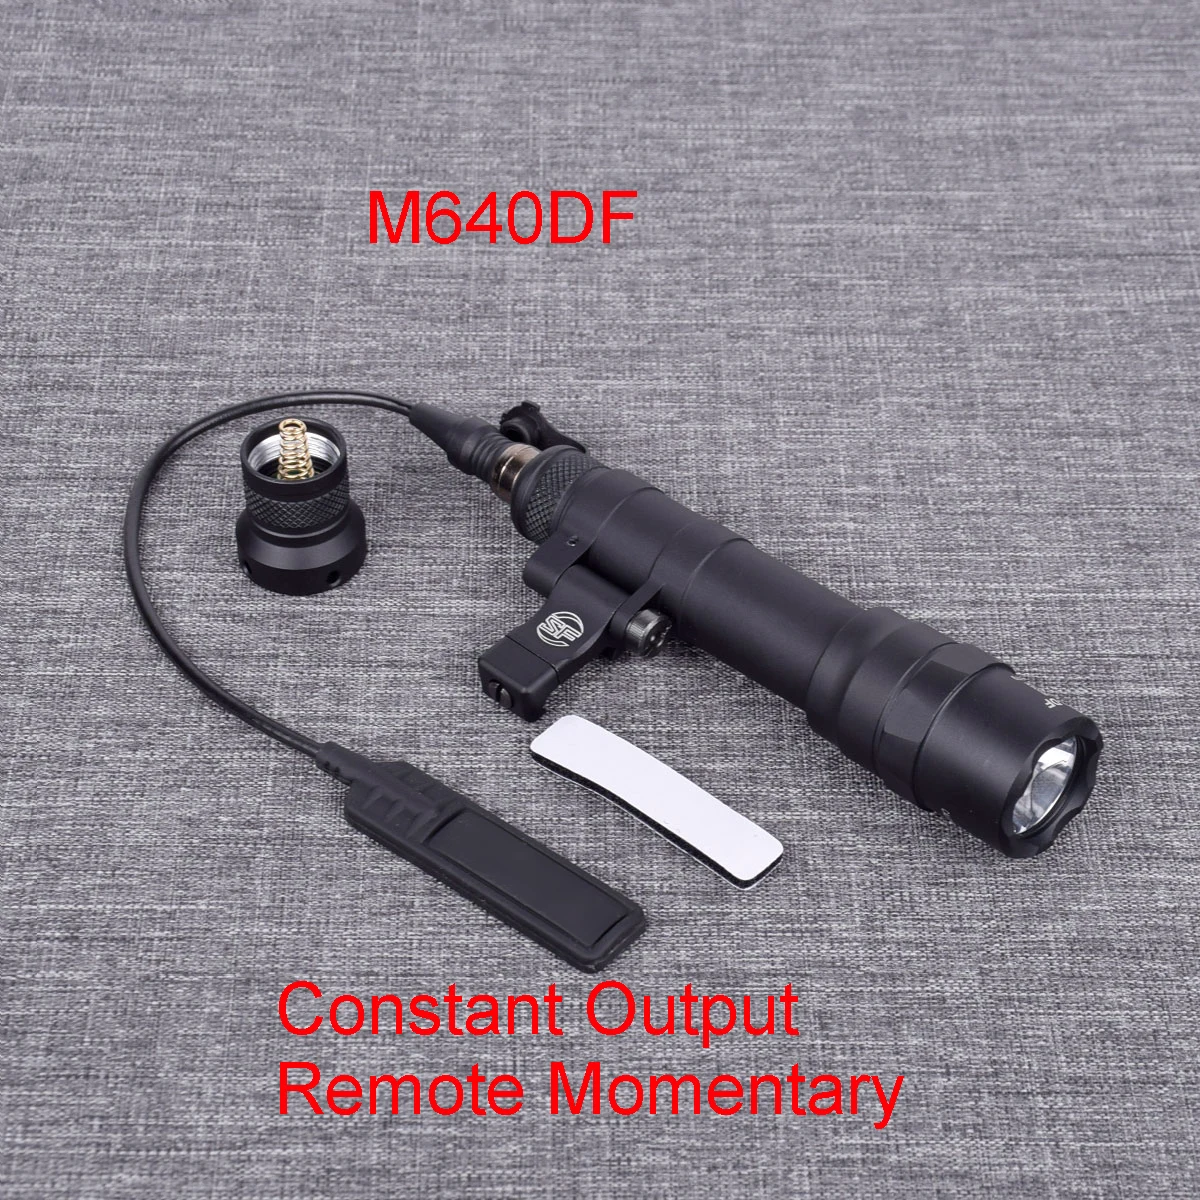 

Tactical SF M640DF Weapon Gun Light Constant Remote Tape Tail Switch With Adjustable Offset Mount For Airsoft Rifle AR15 M16